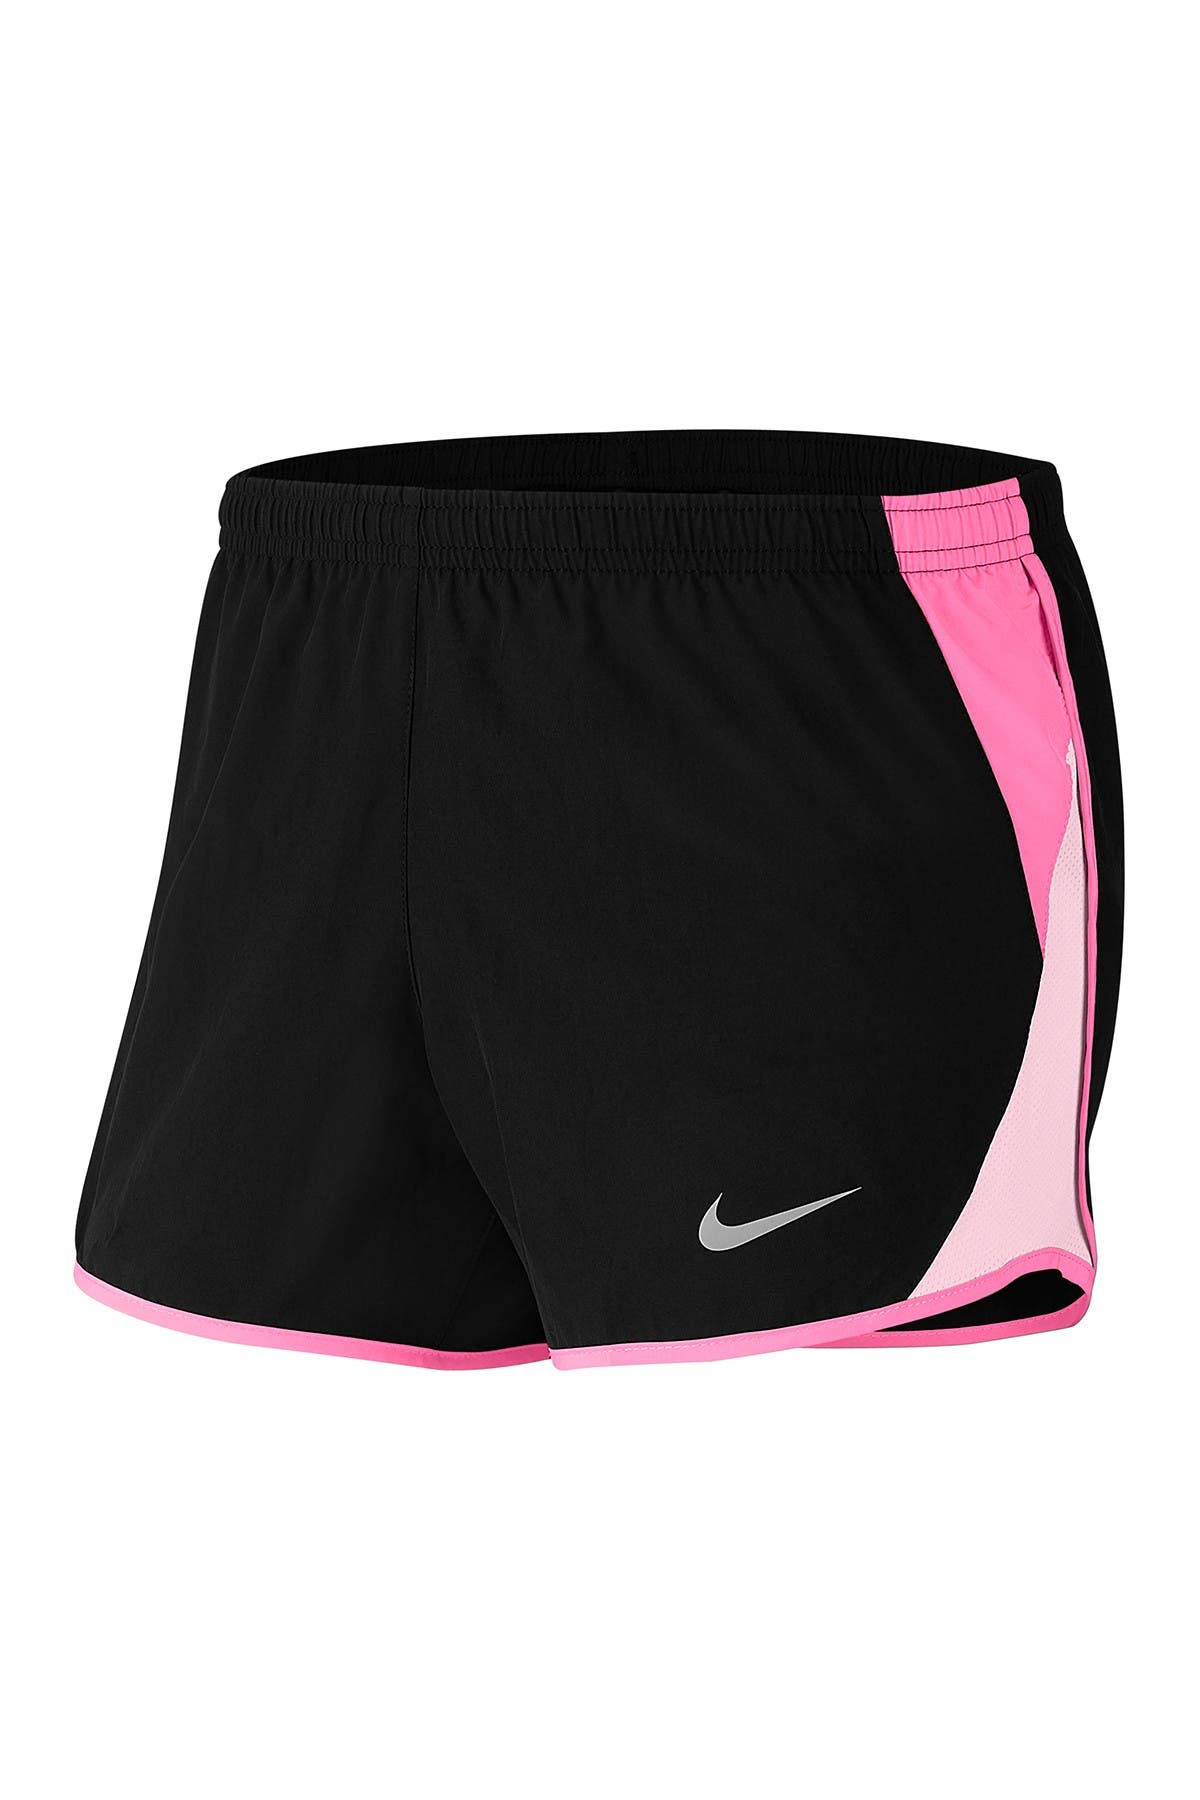 cute nike workout clothes